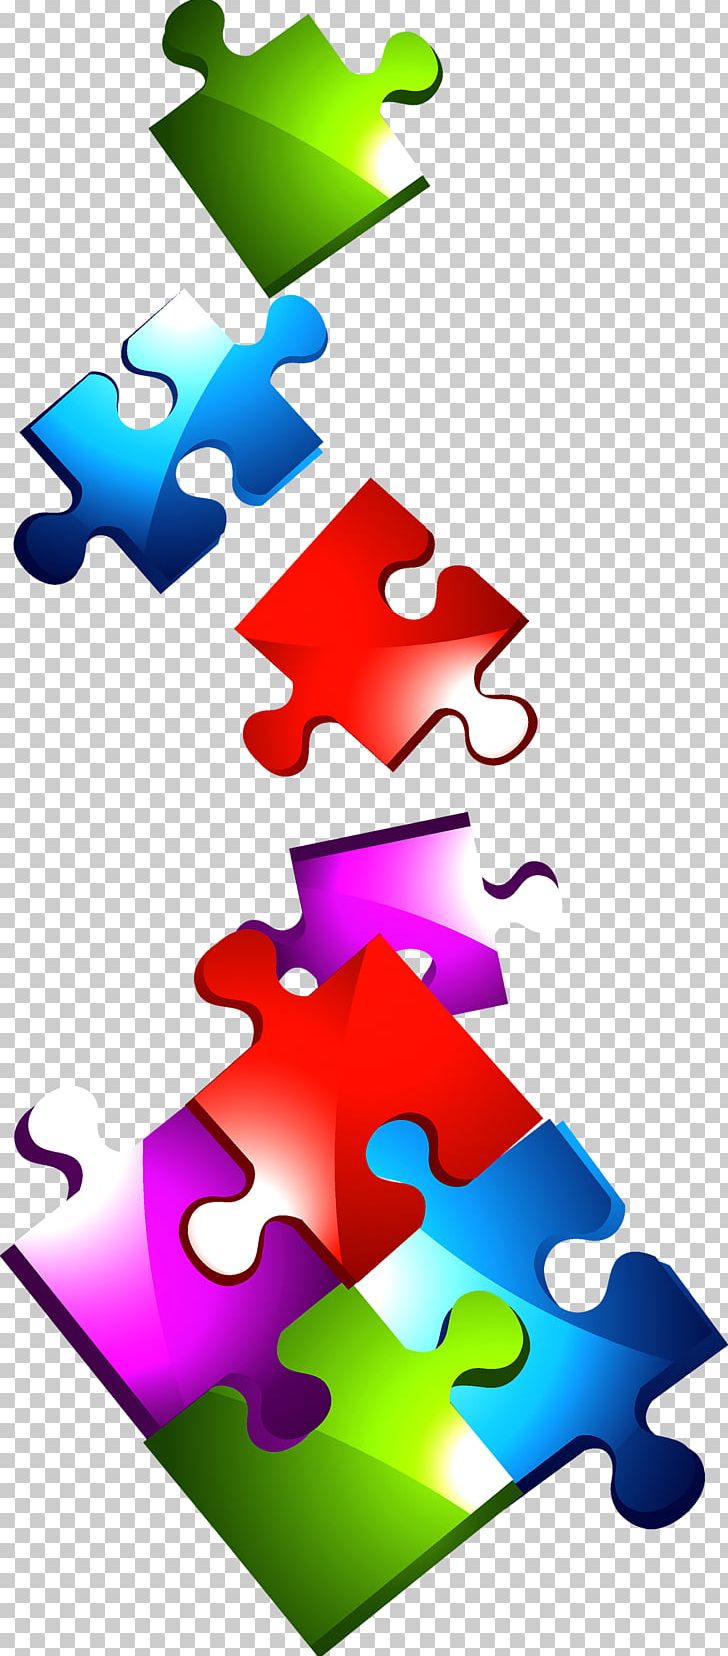 Jigsaw Puzzle Puzz 3D PNG, Clipart, Art, Bright, Color, Colorful Background, Colorful Vector Free PNG Download